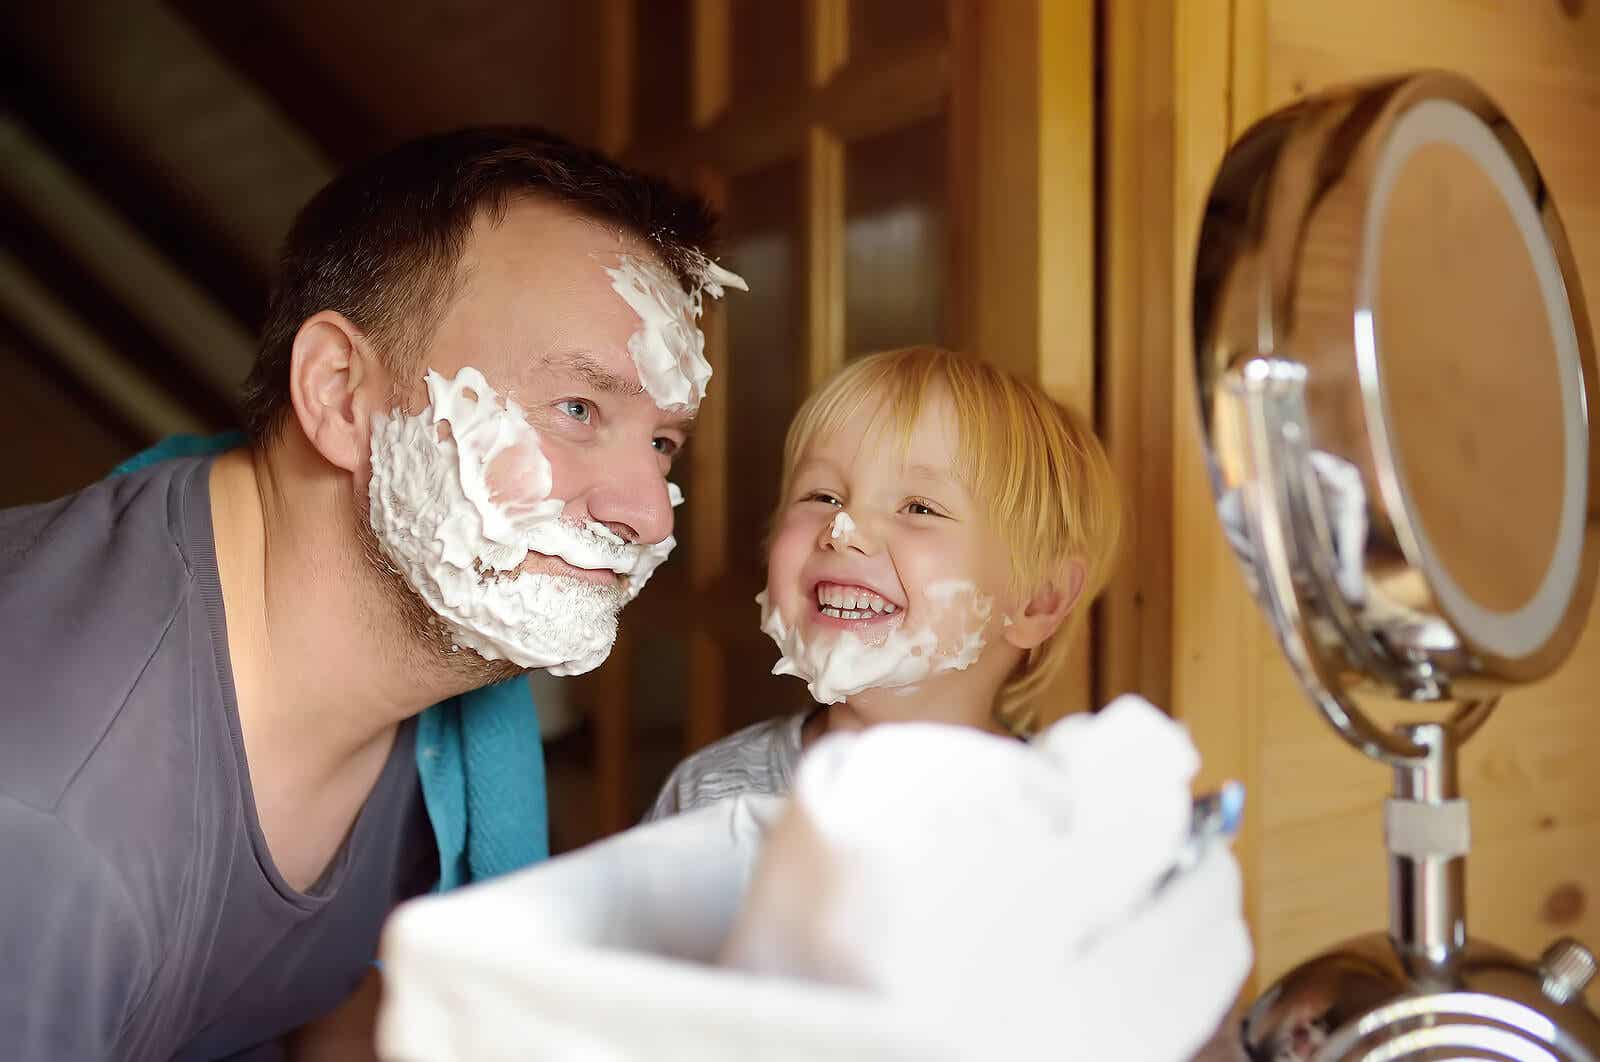 A father and son with shaving cream on their faces, smiling.